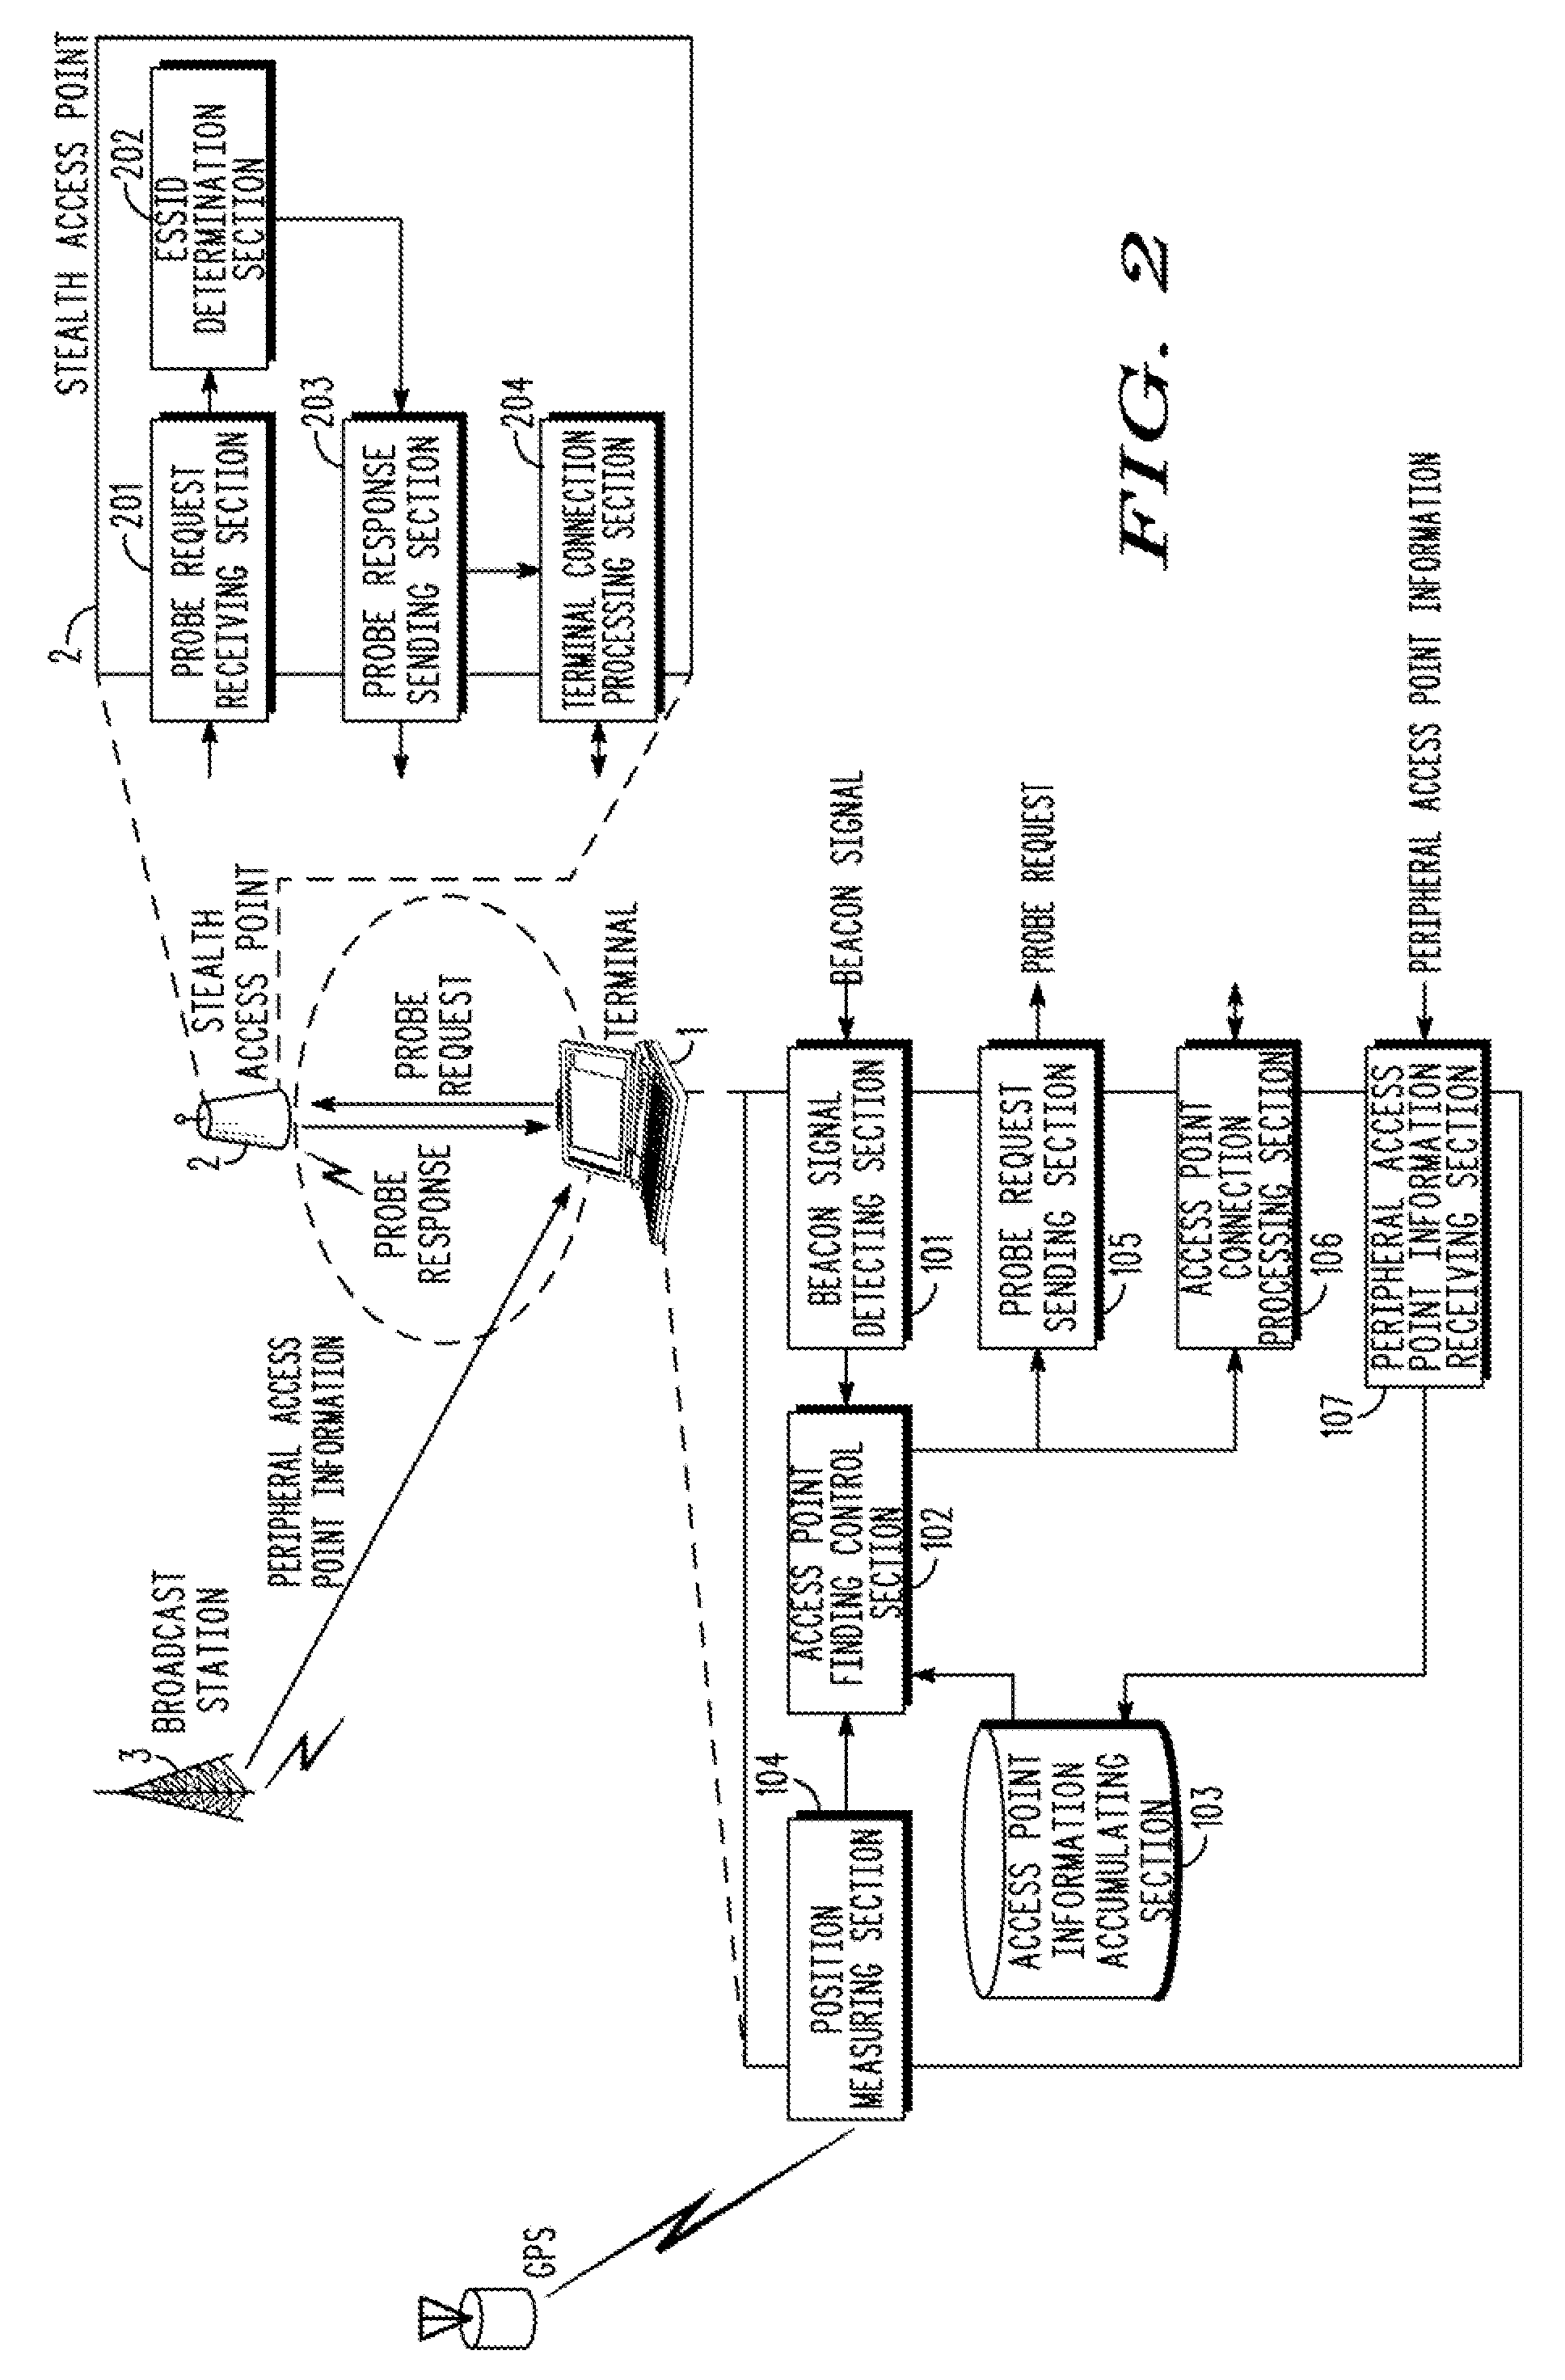 Terminal and access point finding method for communicating with stealth access point